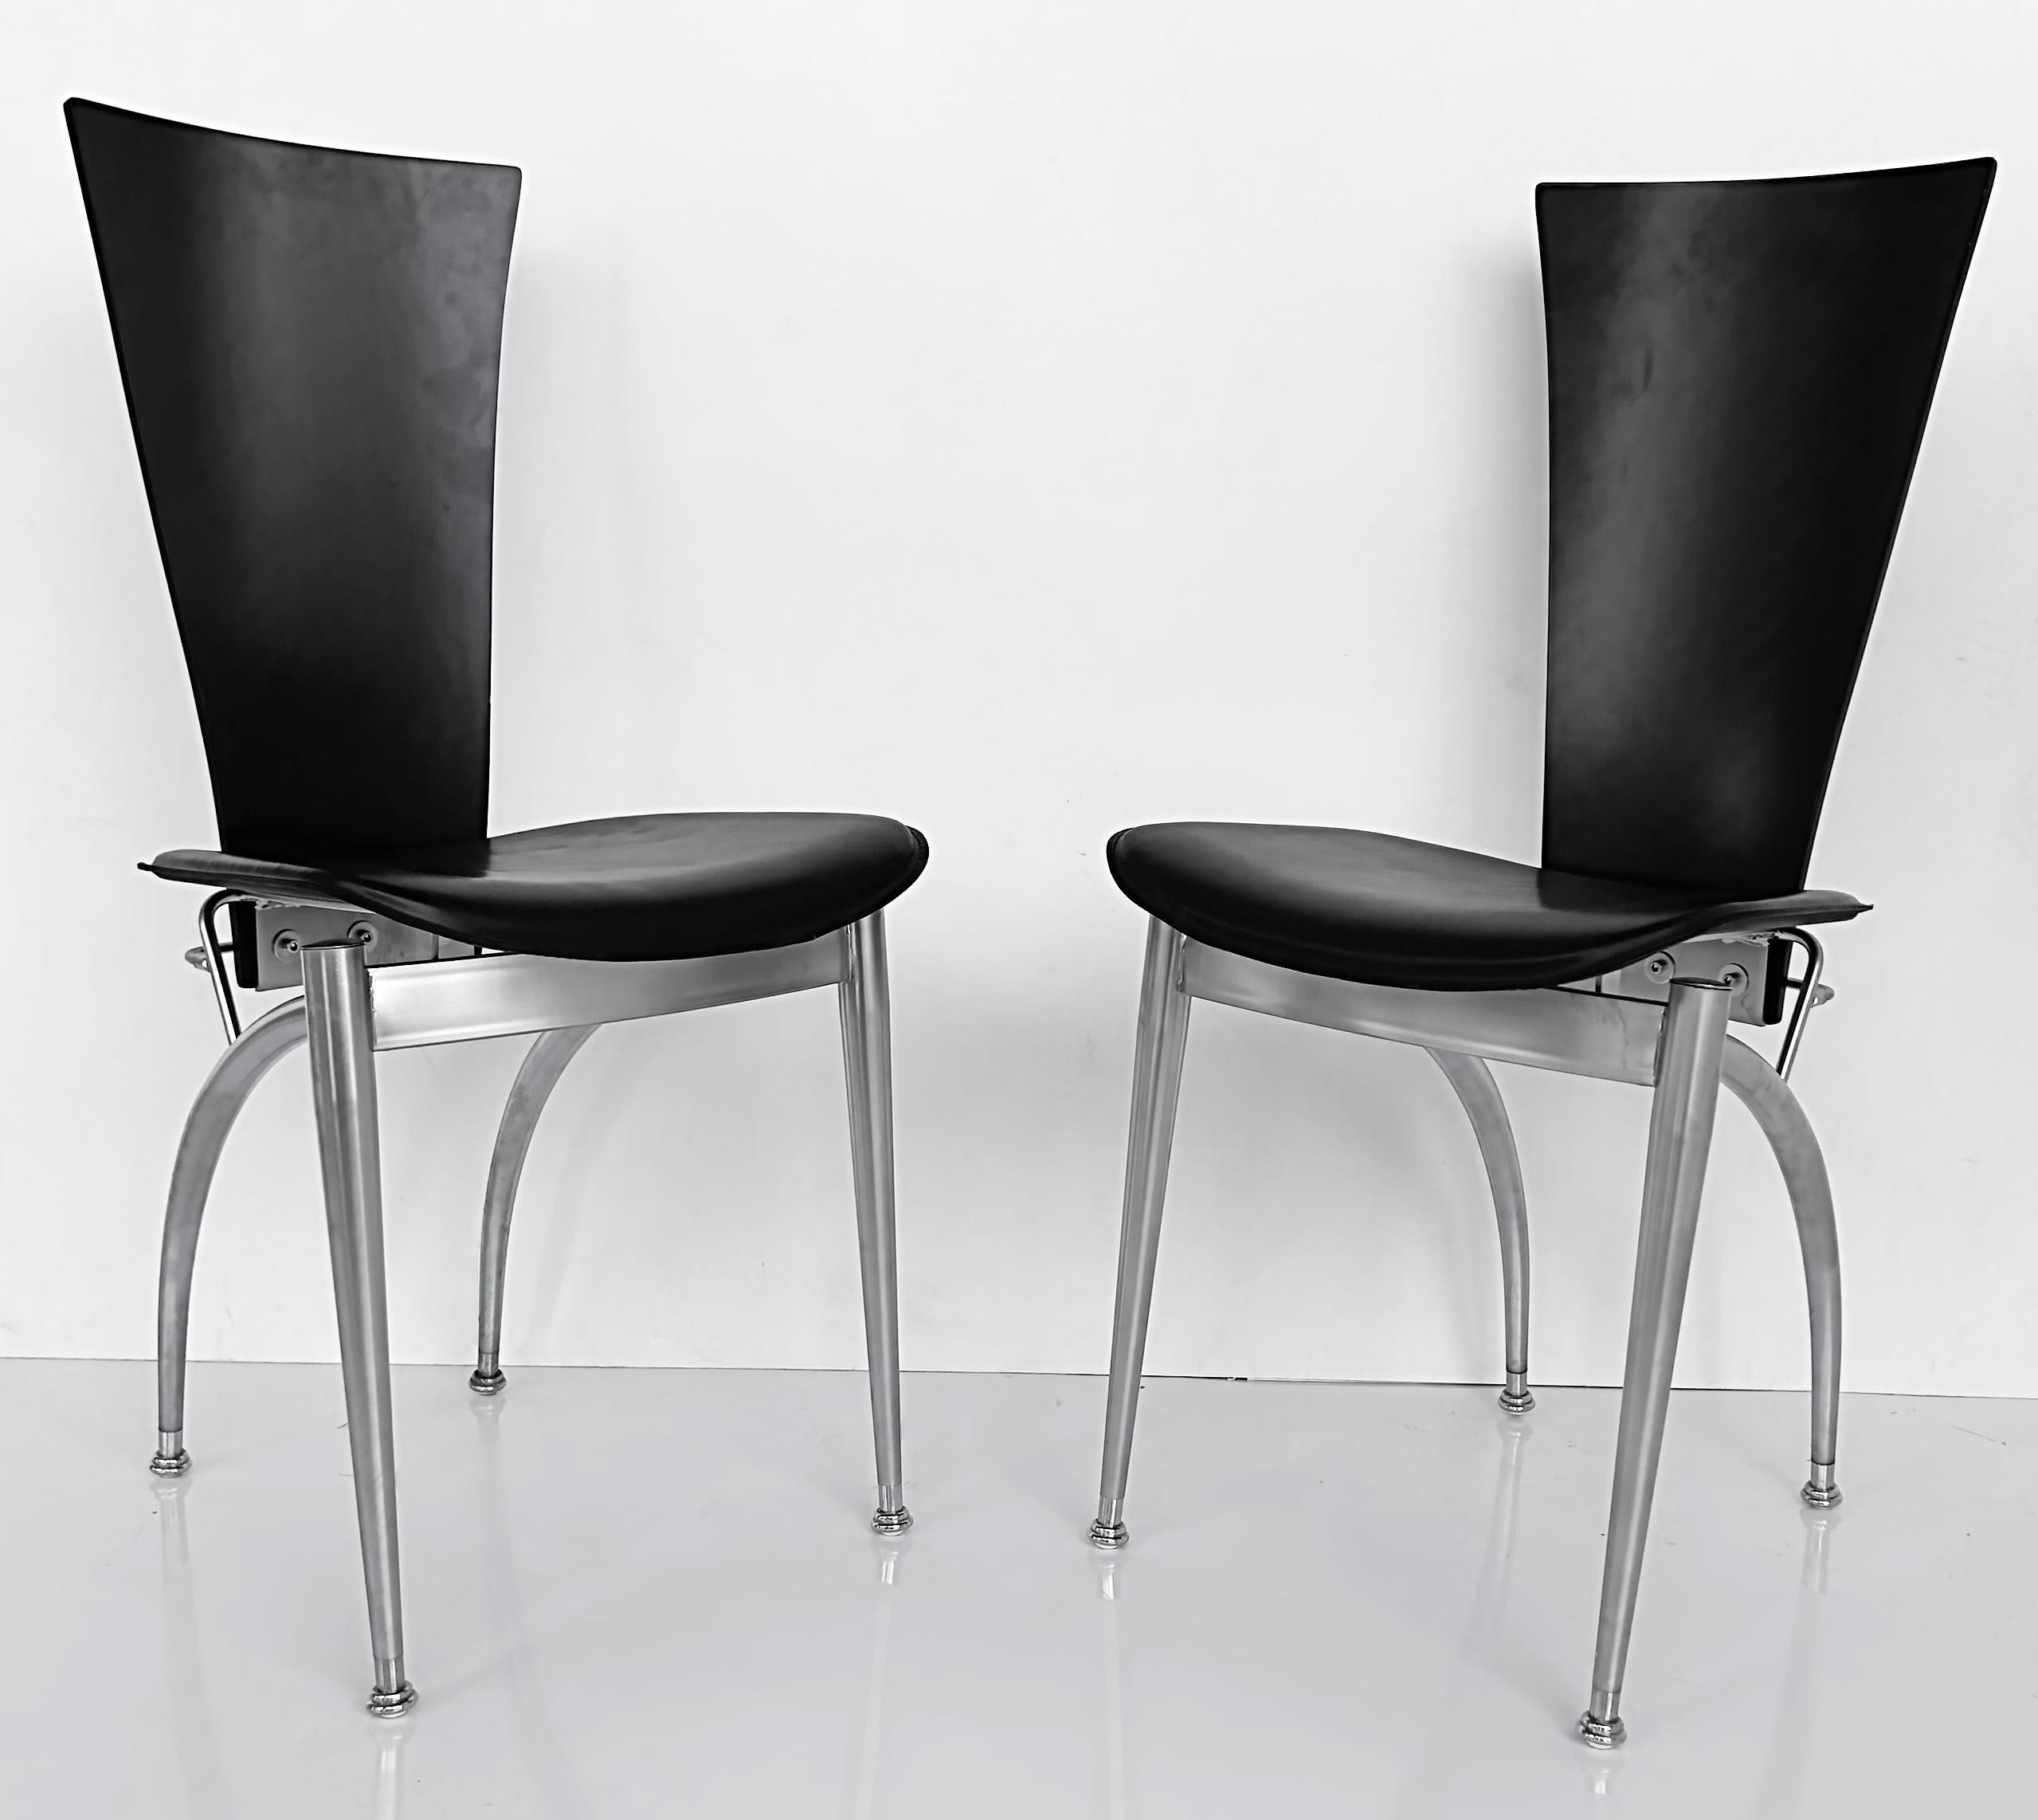 Italian Post-Modern Wood, Leather, Stainless Dining Chairs, Set of 4

Offered for sale is a set of four black Italian Post Modern dining chairs with stainless steel frames. The backs of the chairs are wood and the seats are black. The stainless